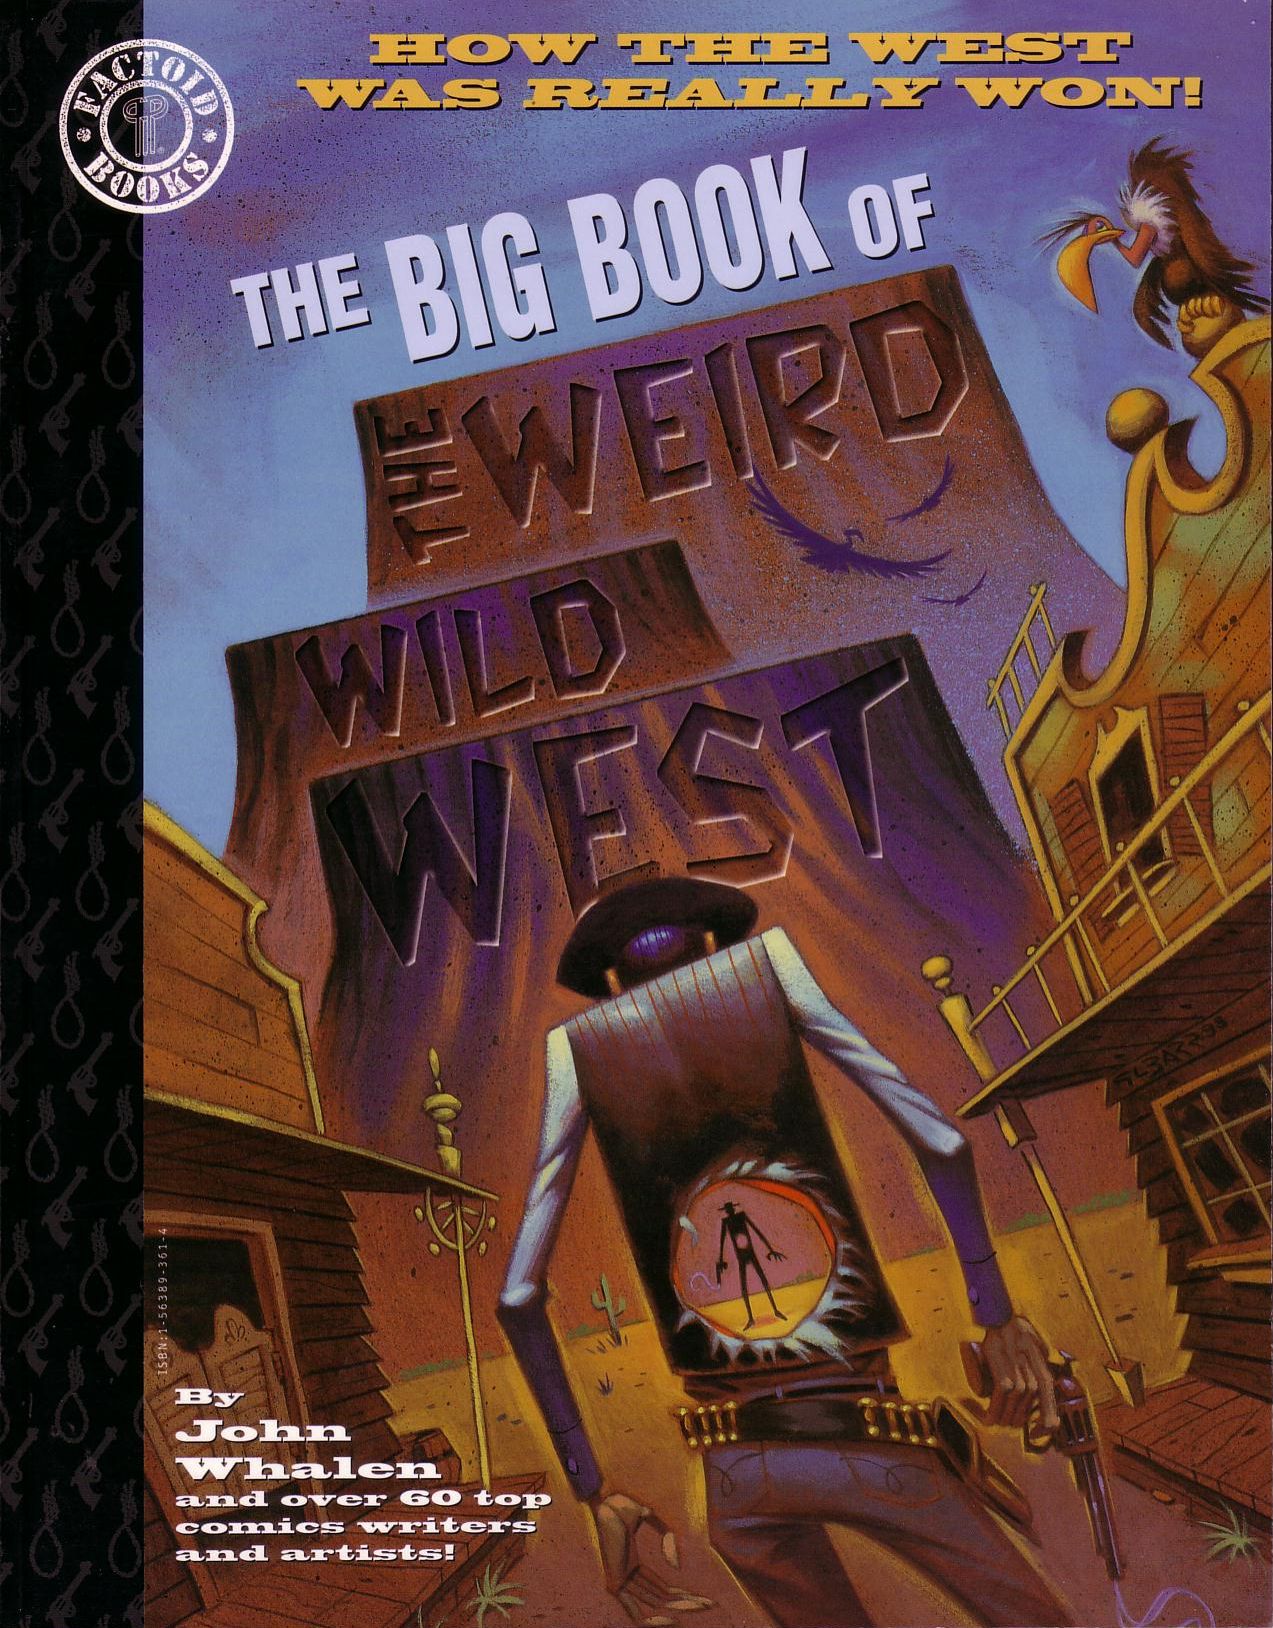 Read online The Big Book of... comic -  Issue # TPB The Weird Wild West - 1